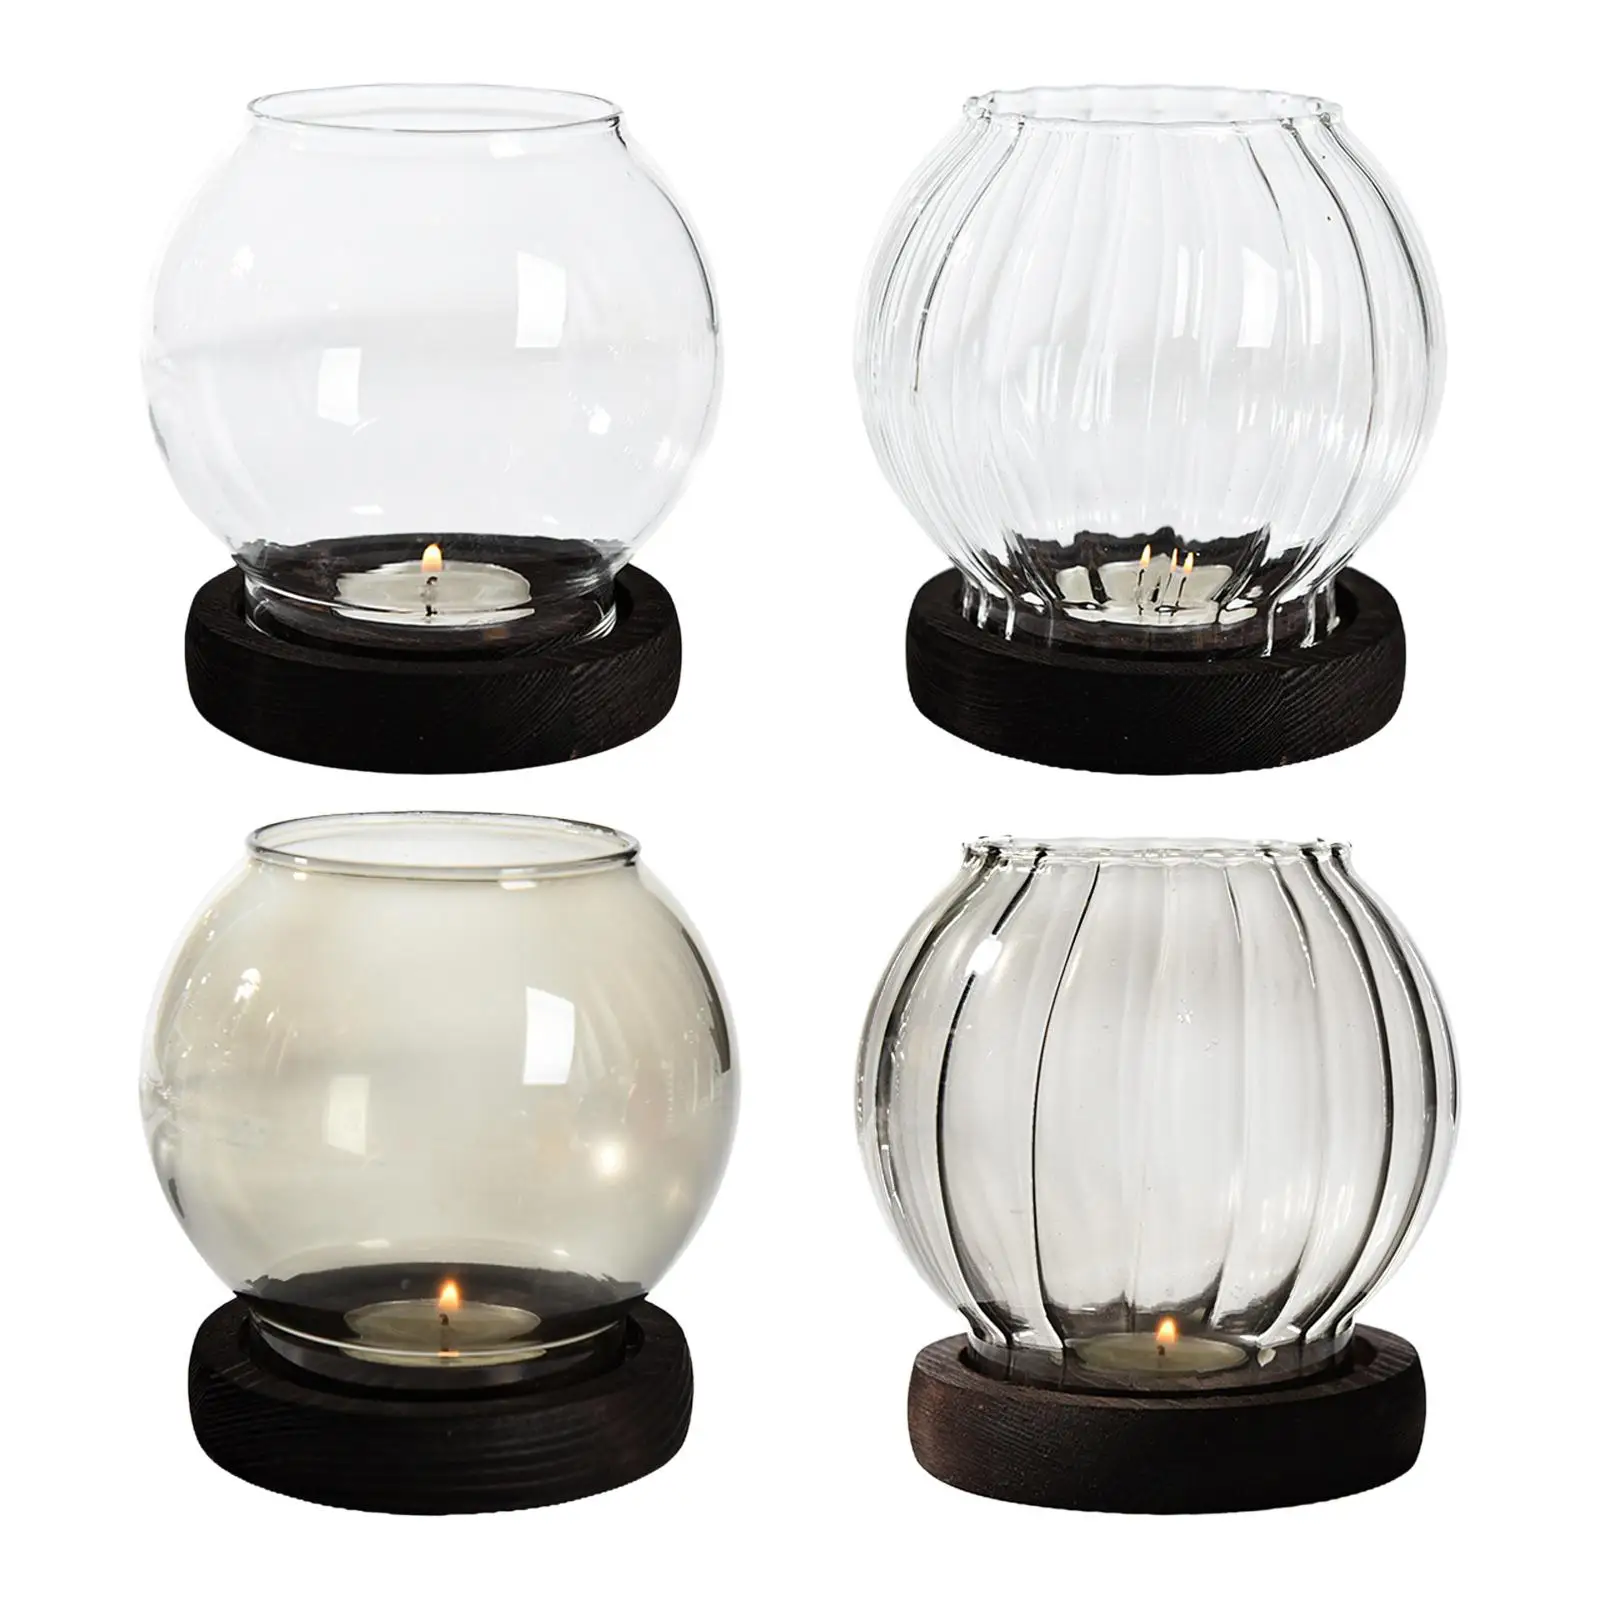 Glass Candle Holders Table Centerpiece Votive Bowl for Home Decorations Gift